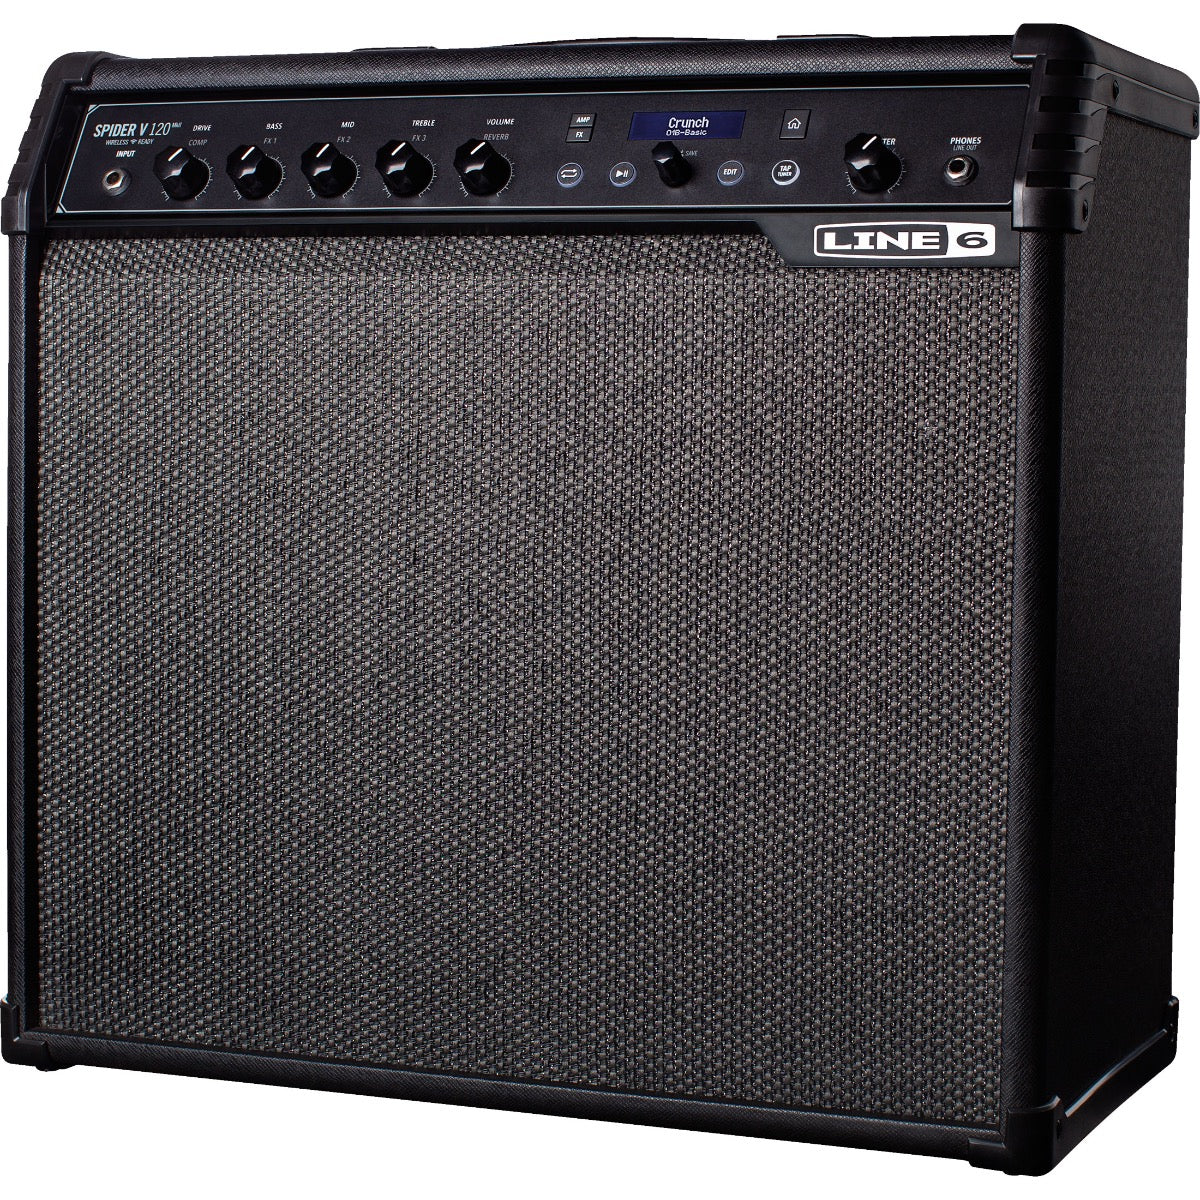 Perspective view of Line 6 Spider V 120 MkII Guitar Amplifier showing front and right side